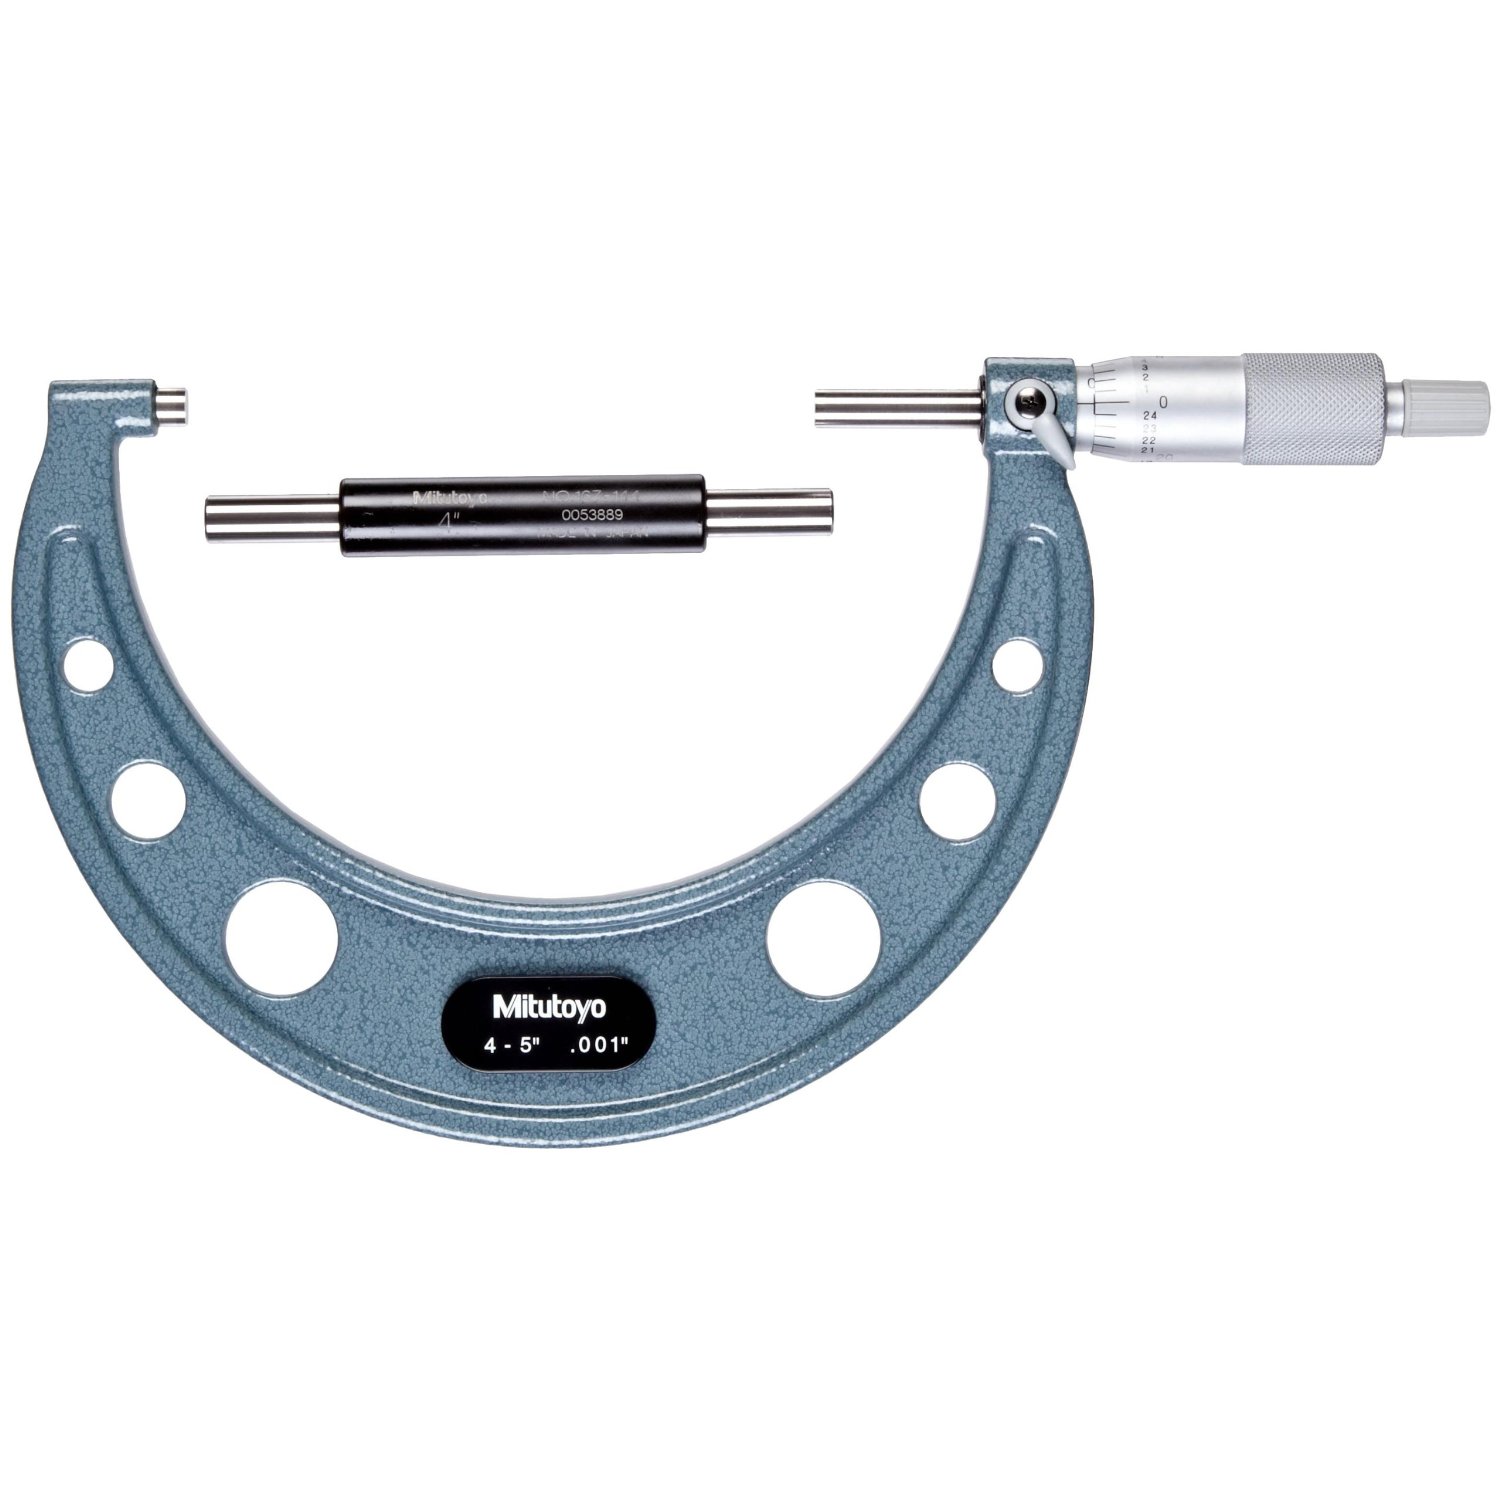 Mitutoyo 103-181 Outside Micrometer 4-5/0.001 - Click Image to Close